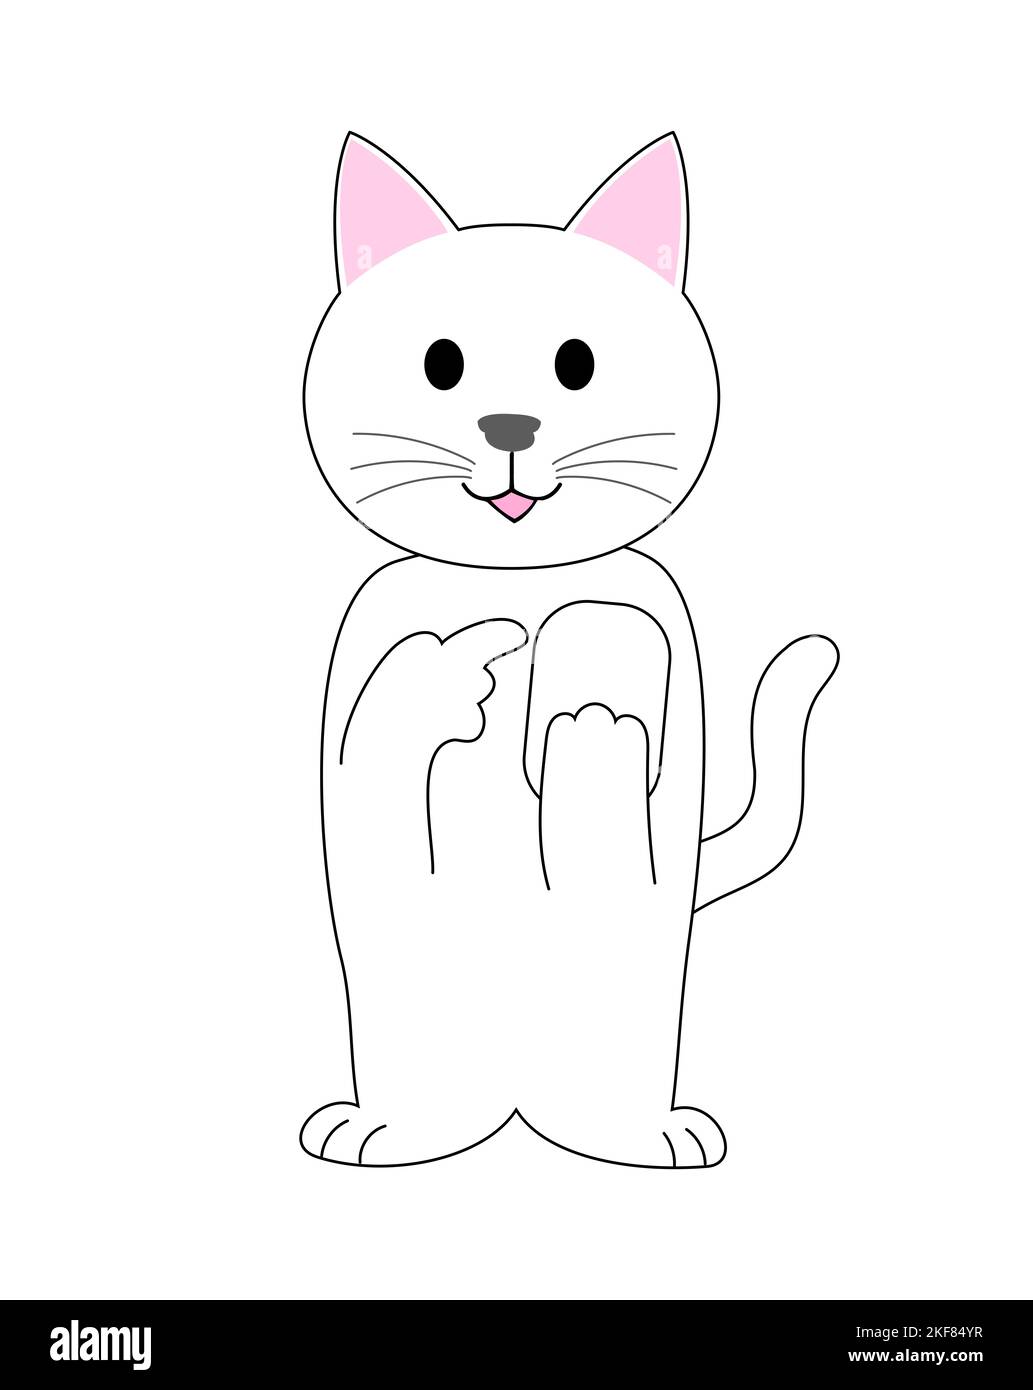 A White Kitten with a cellphone Stock Photo